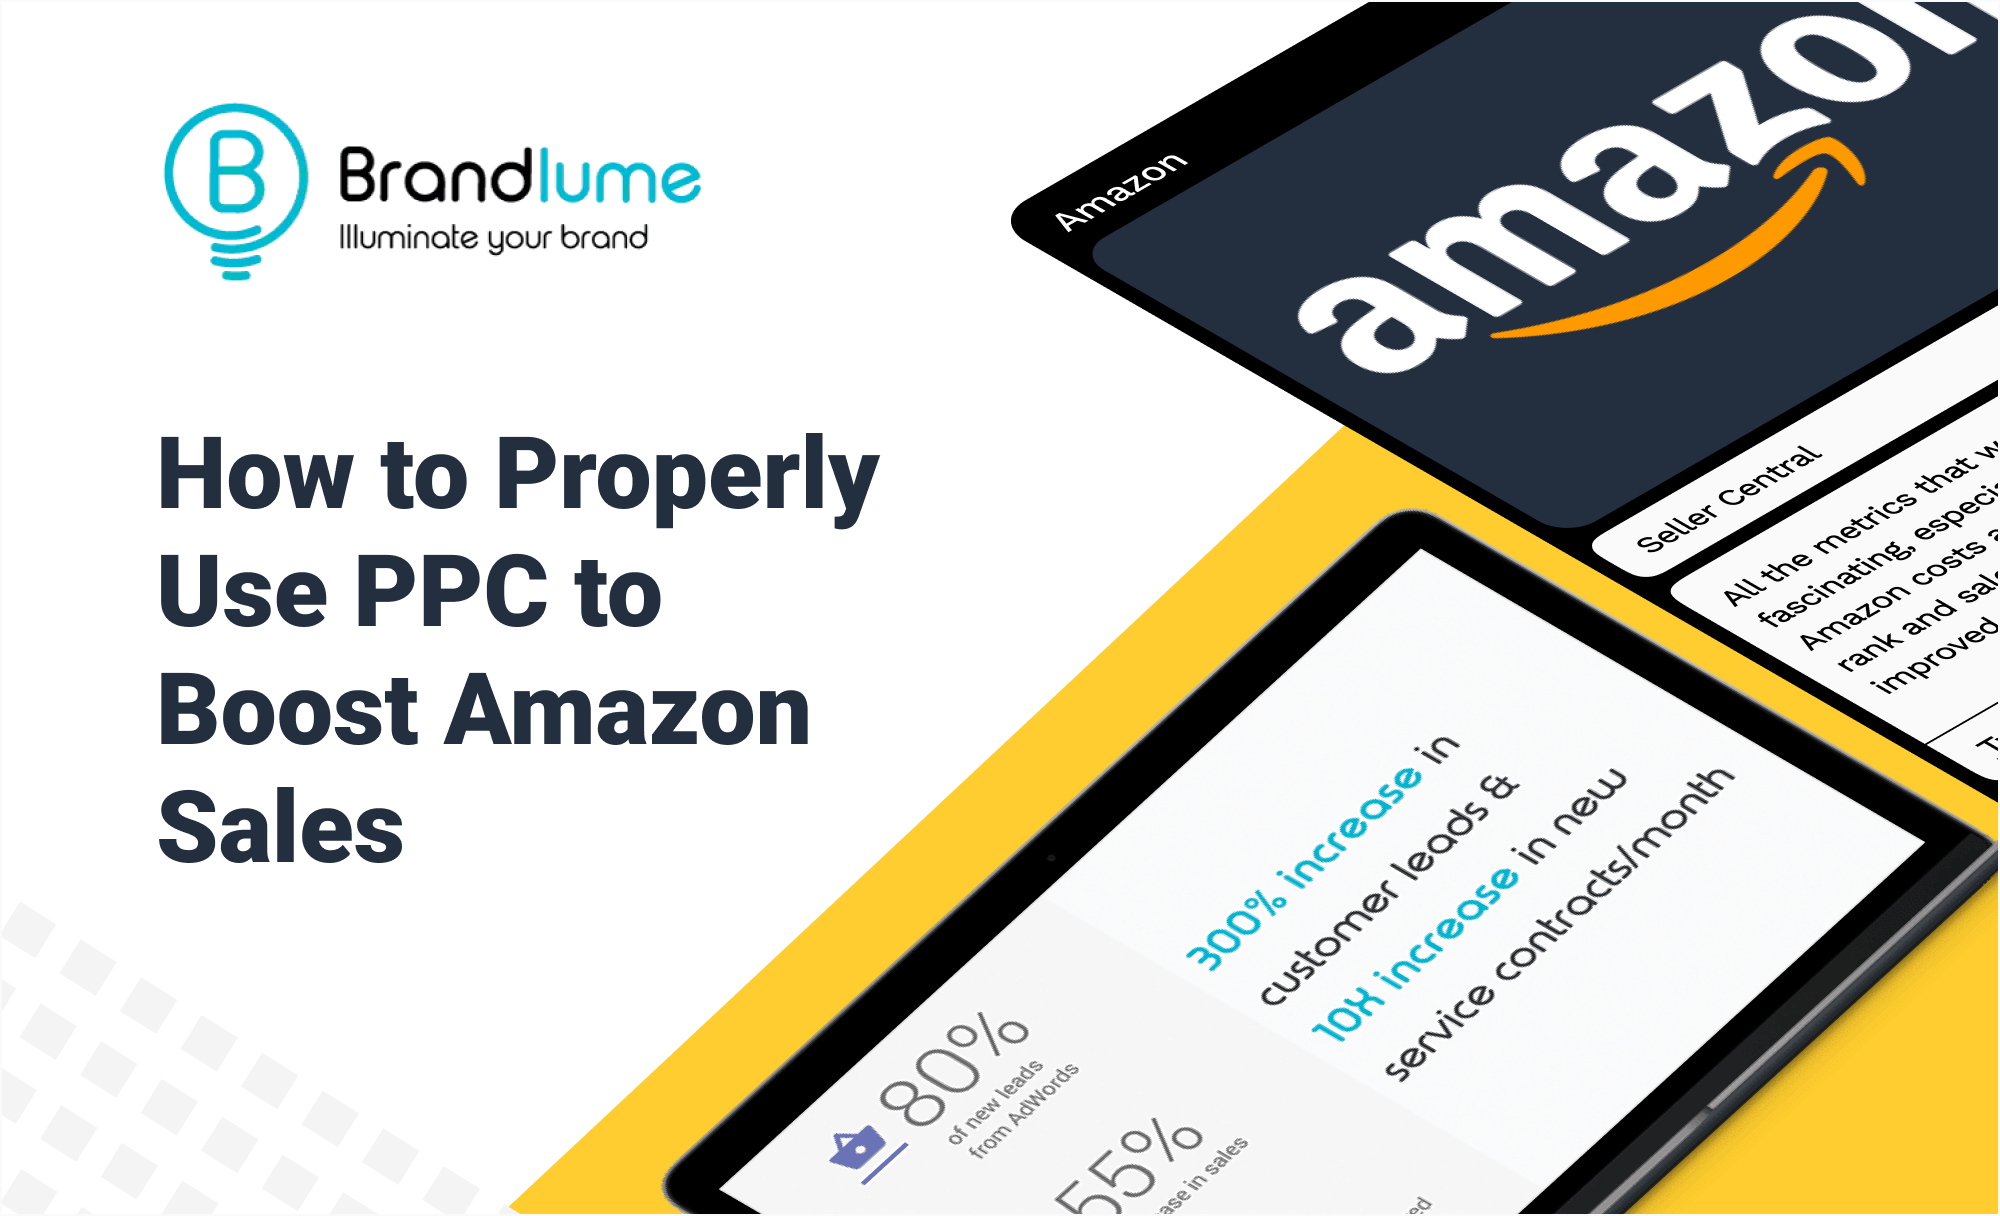 How to Properly Use PPC to Boost Amazon Sales?